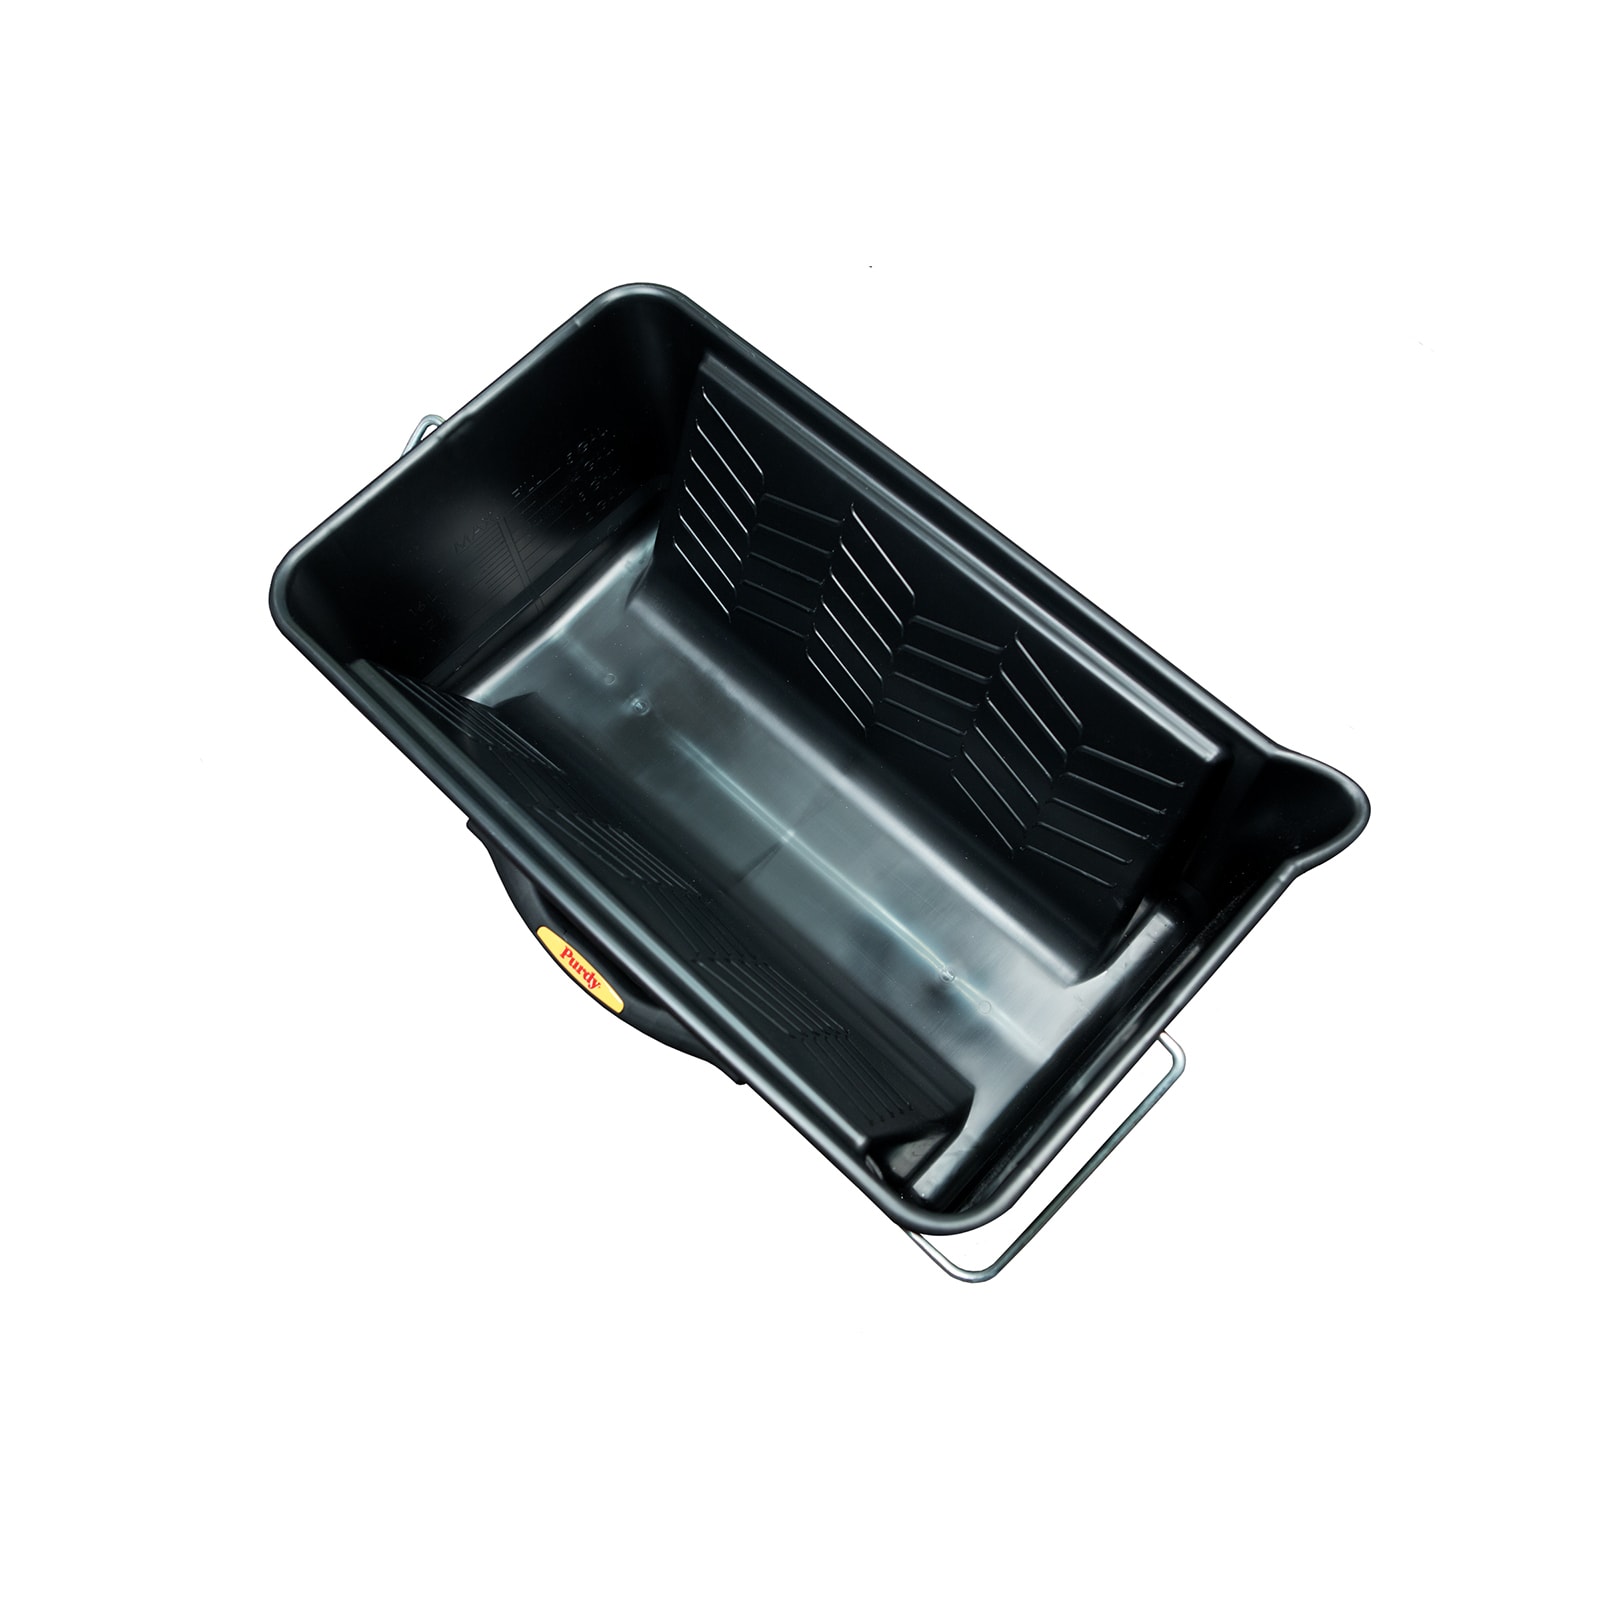 Purdy Nest 15.59-in x 9-in Paint Tray in the Paint Trays